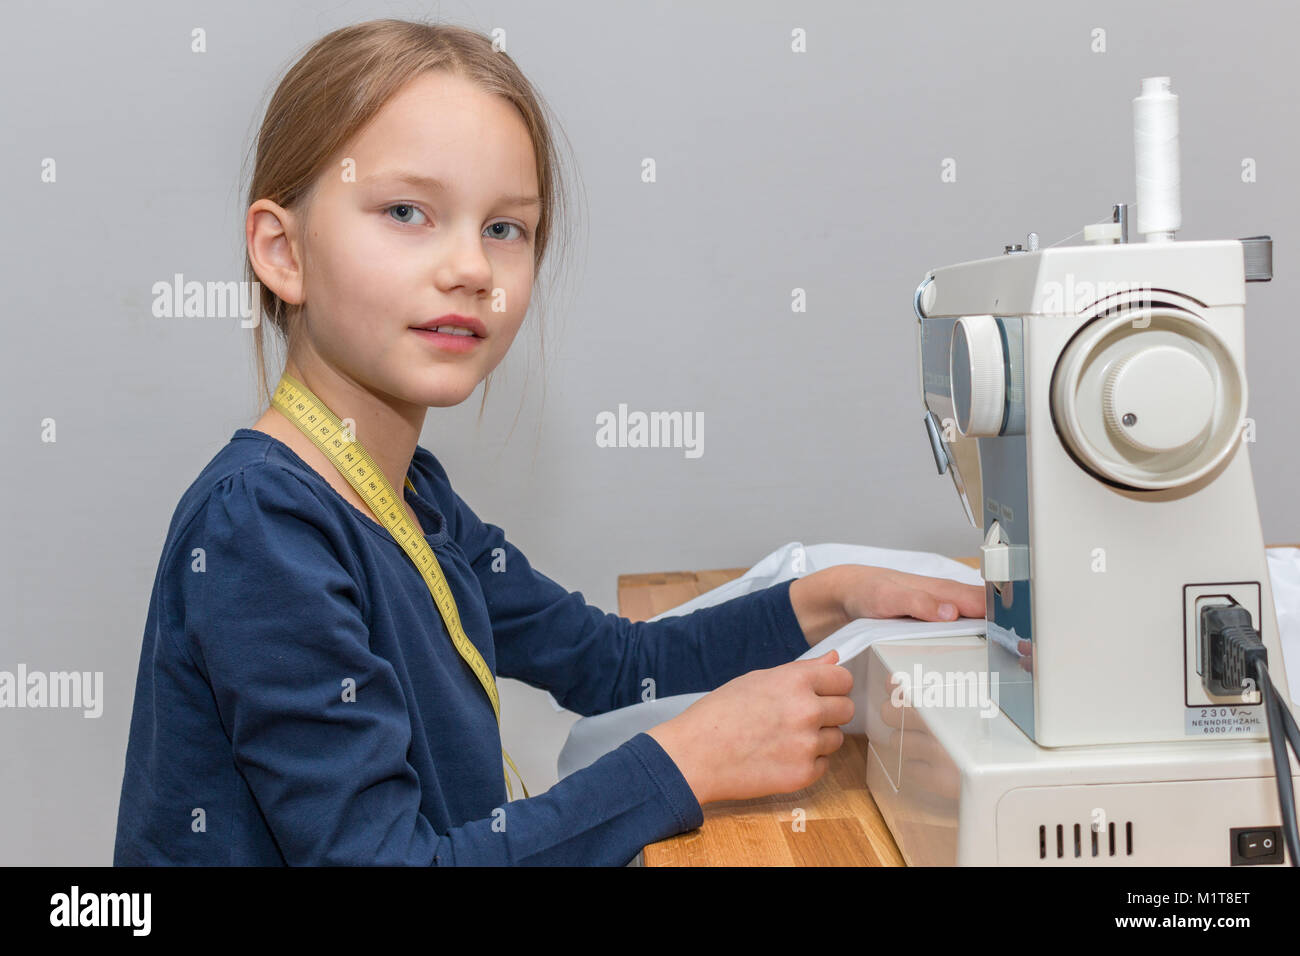 Portrait of a 8 year old girl sewing a pink and white striped cloth with a sewing machine, smiling Stock Photo